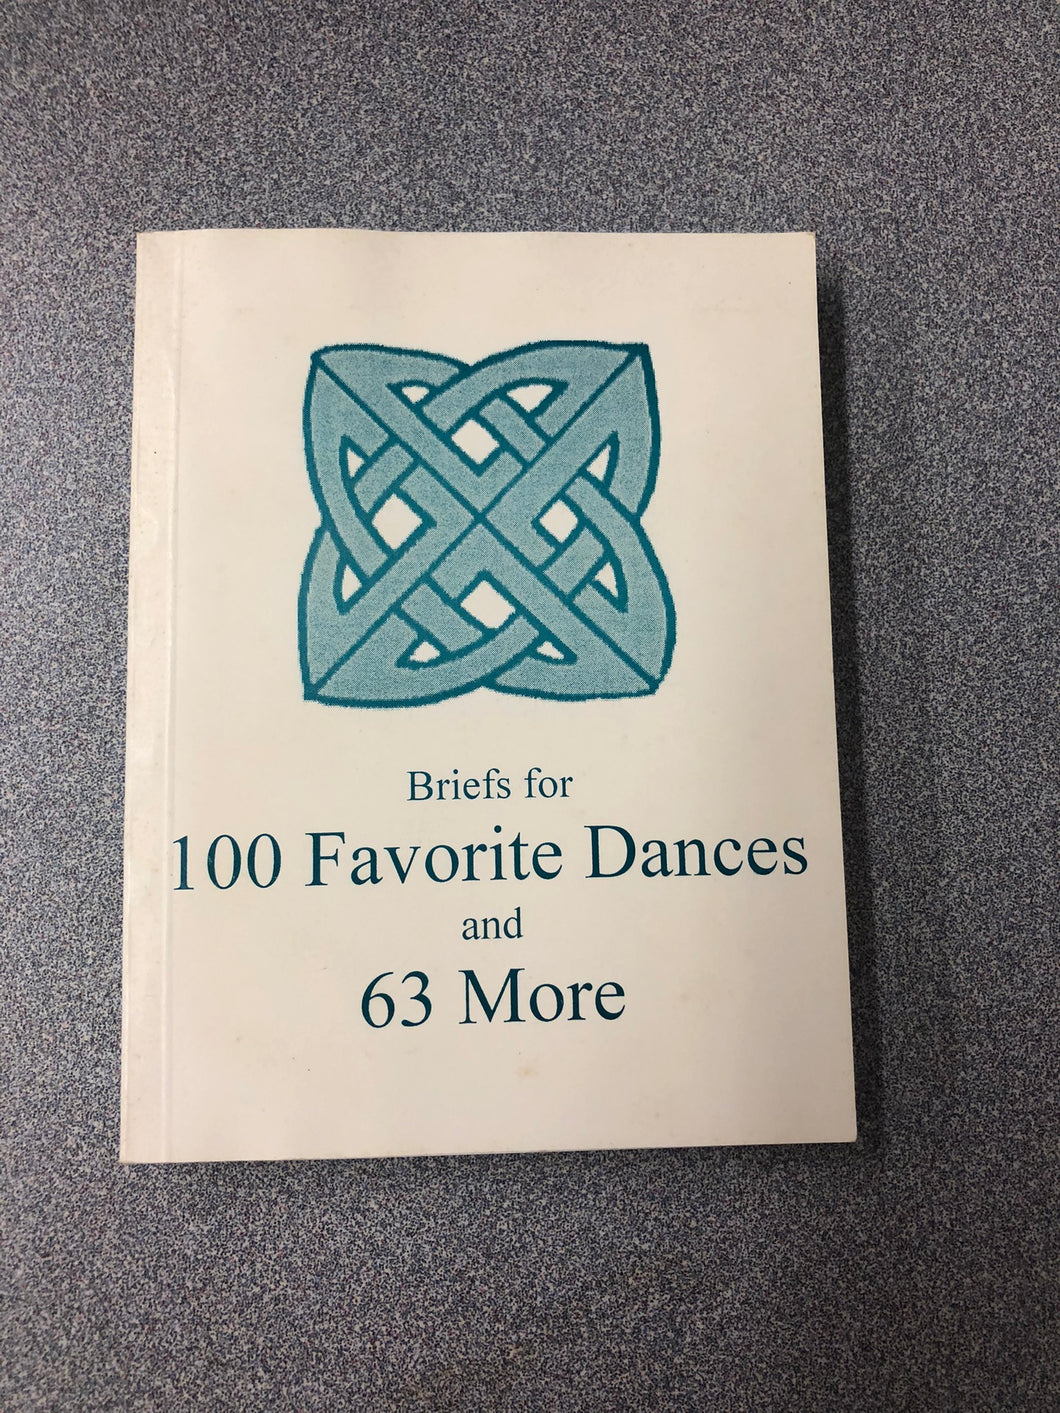 Briefs for 100 Favorite Dances and 63 More, [2002] MU 8/22